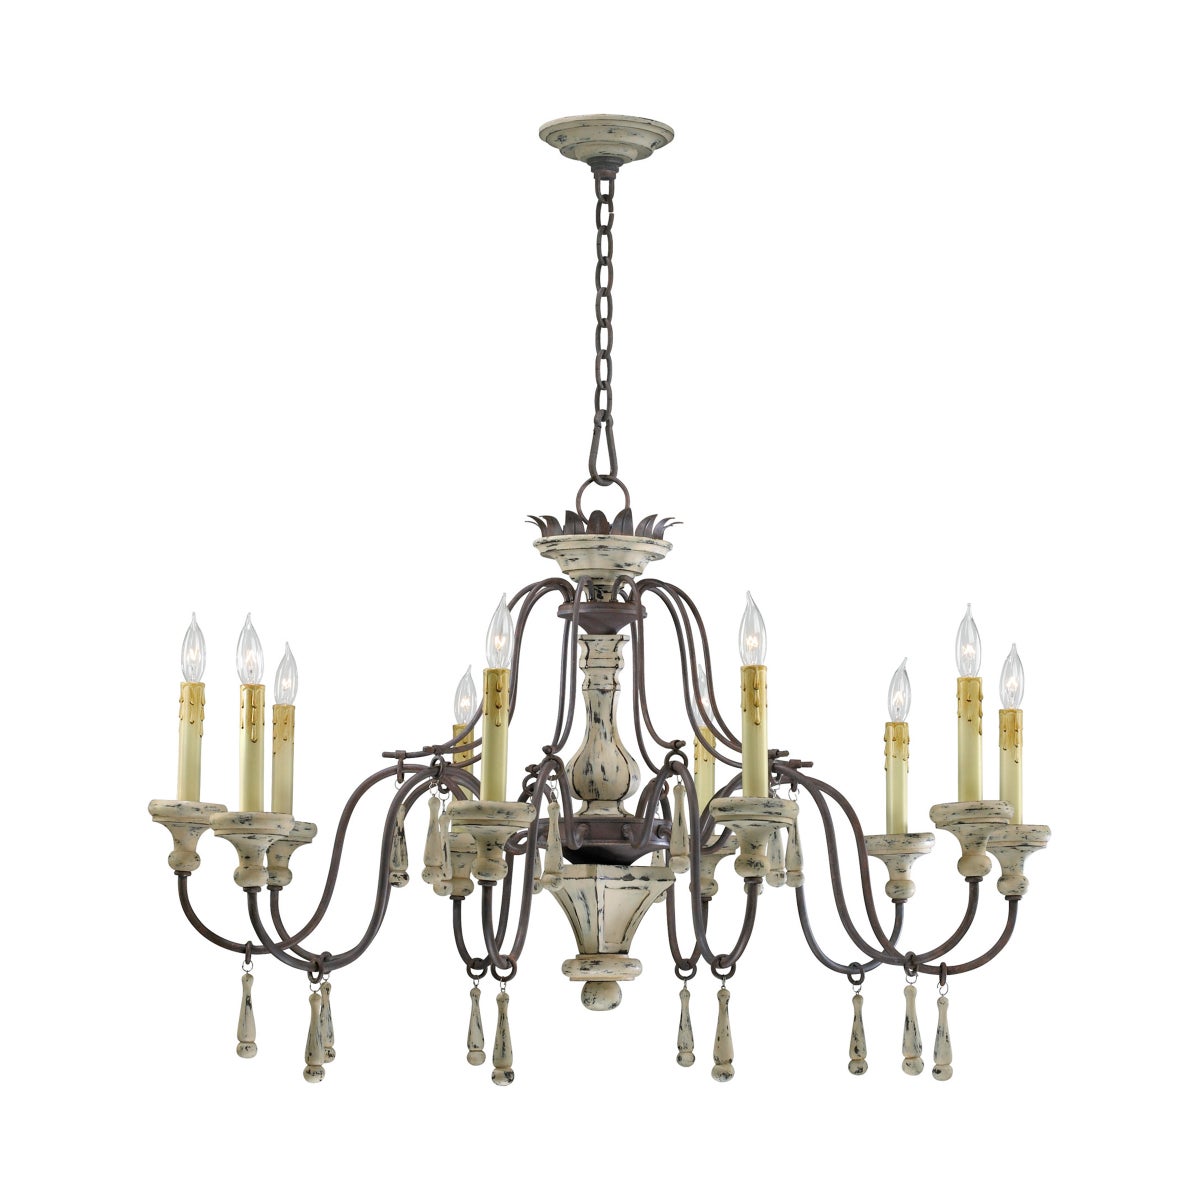 Provence Chandelier 10-Light | Carriage House